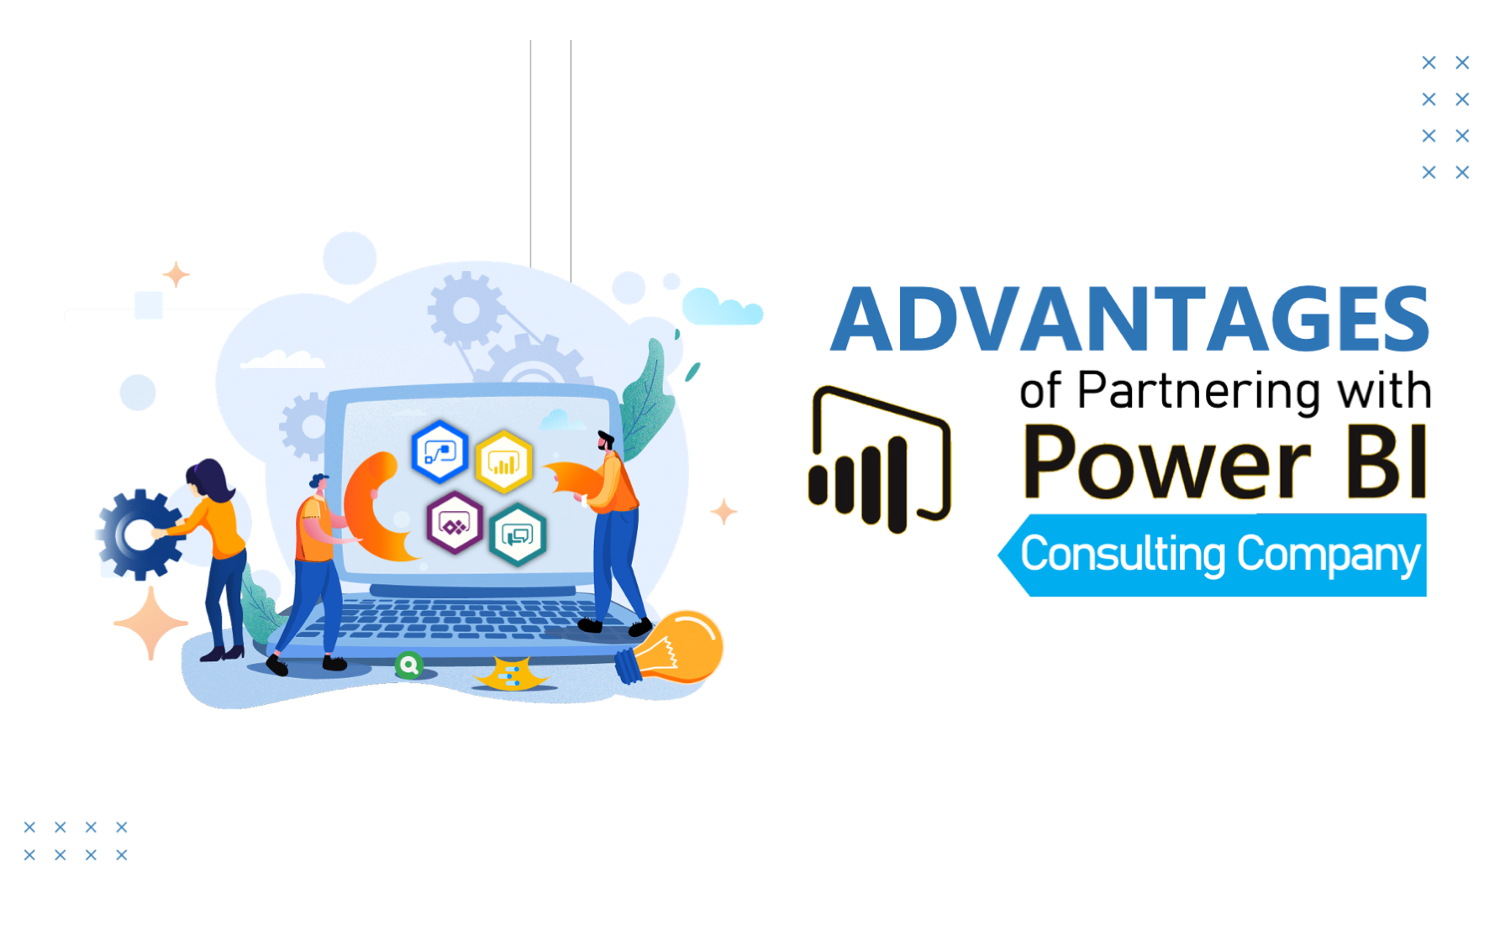 Advantages of Partnering with Power BI Consulting Company